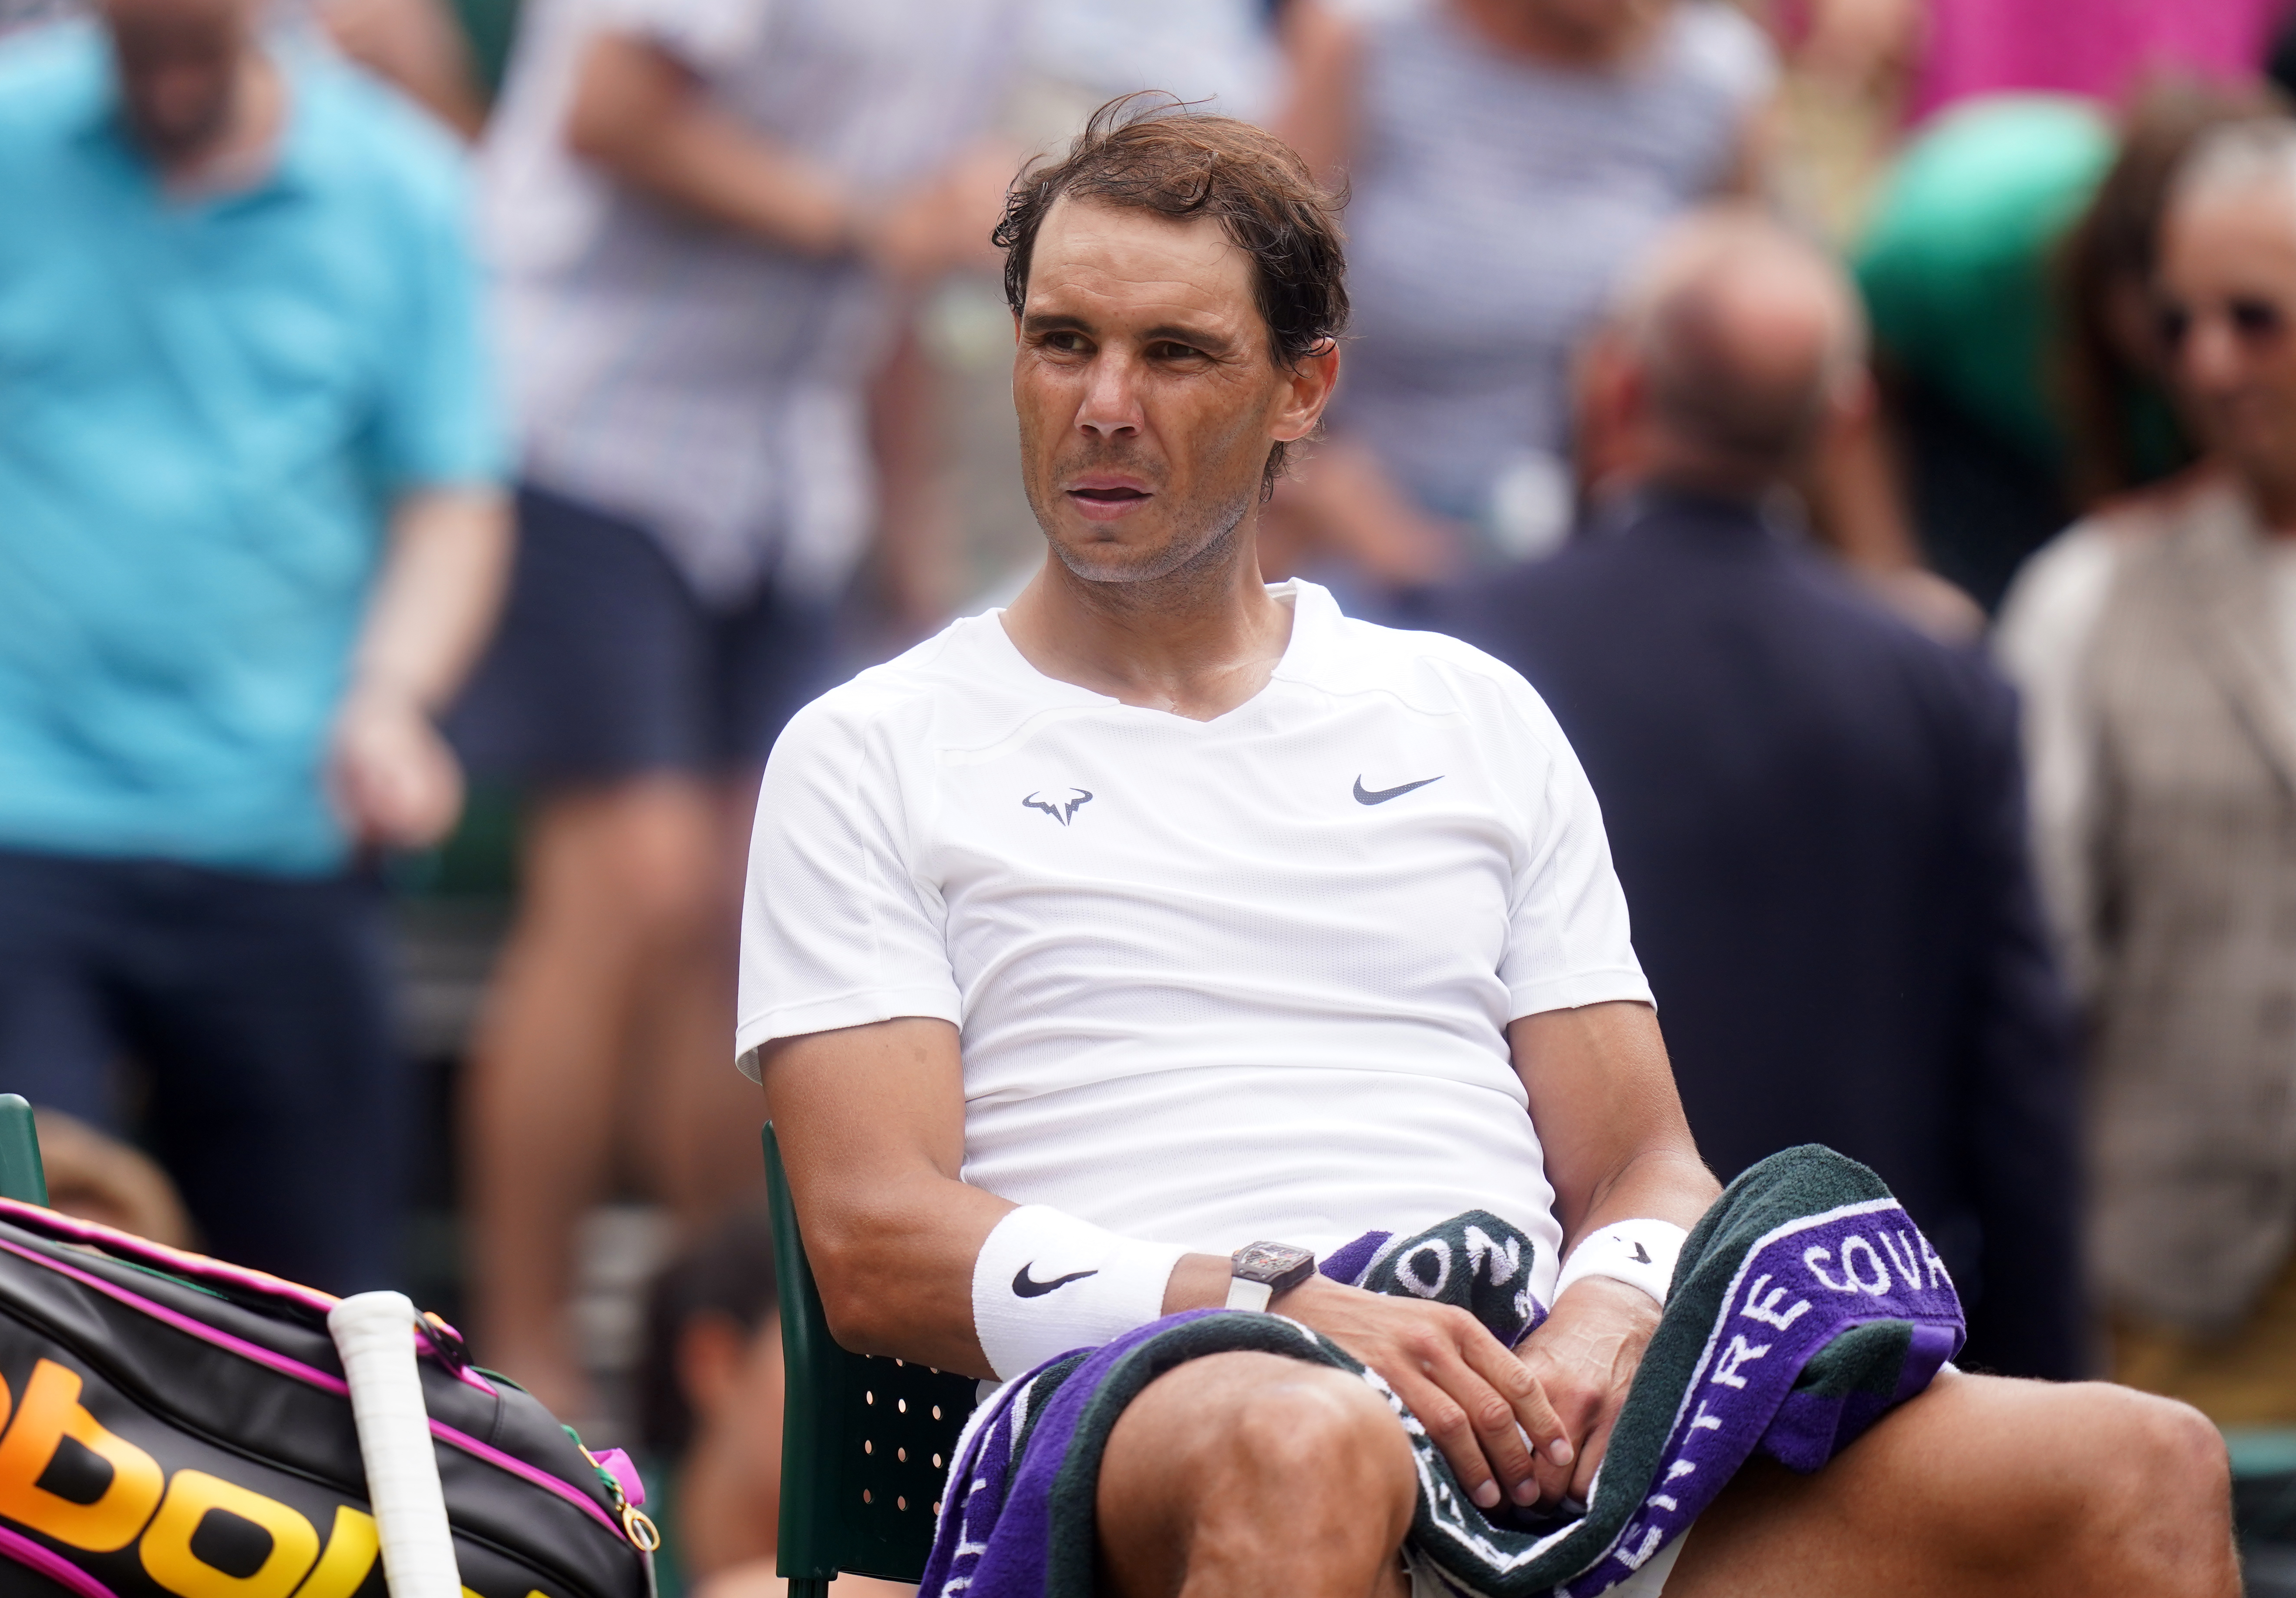 Rafael Nadal has arthroscopic surgery for the hip injury that forced him to  miss the French Open